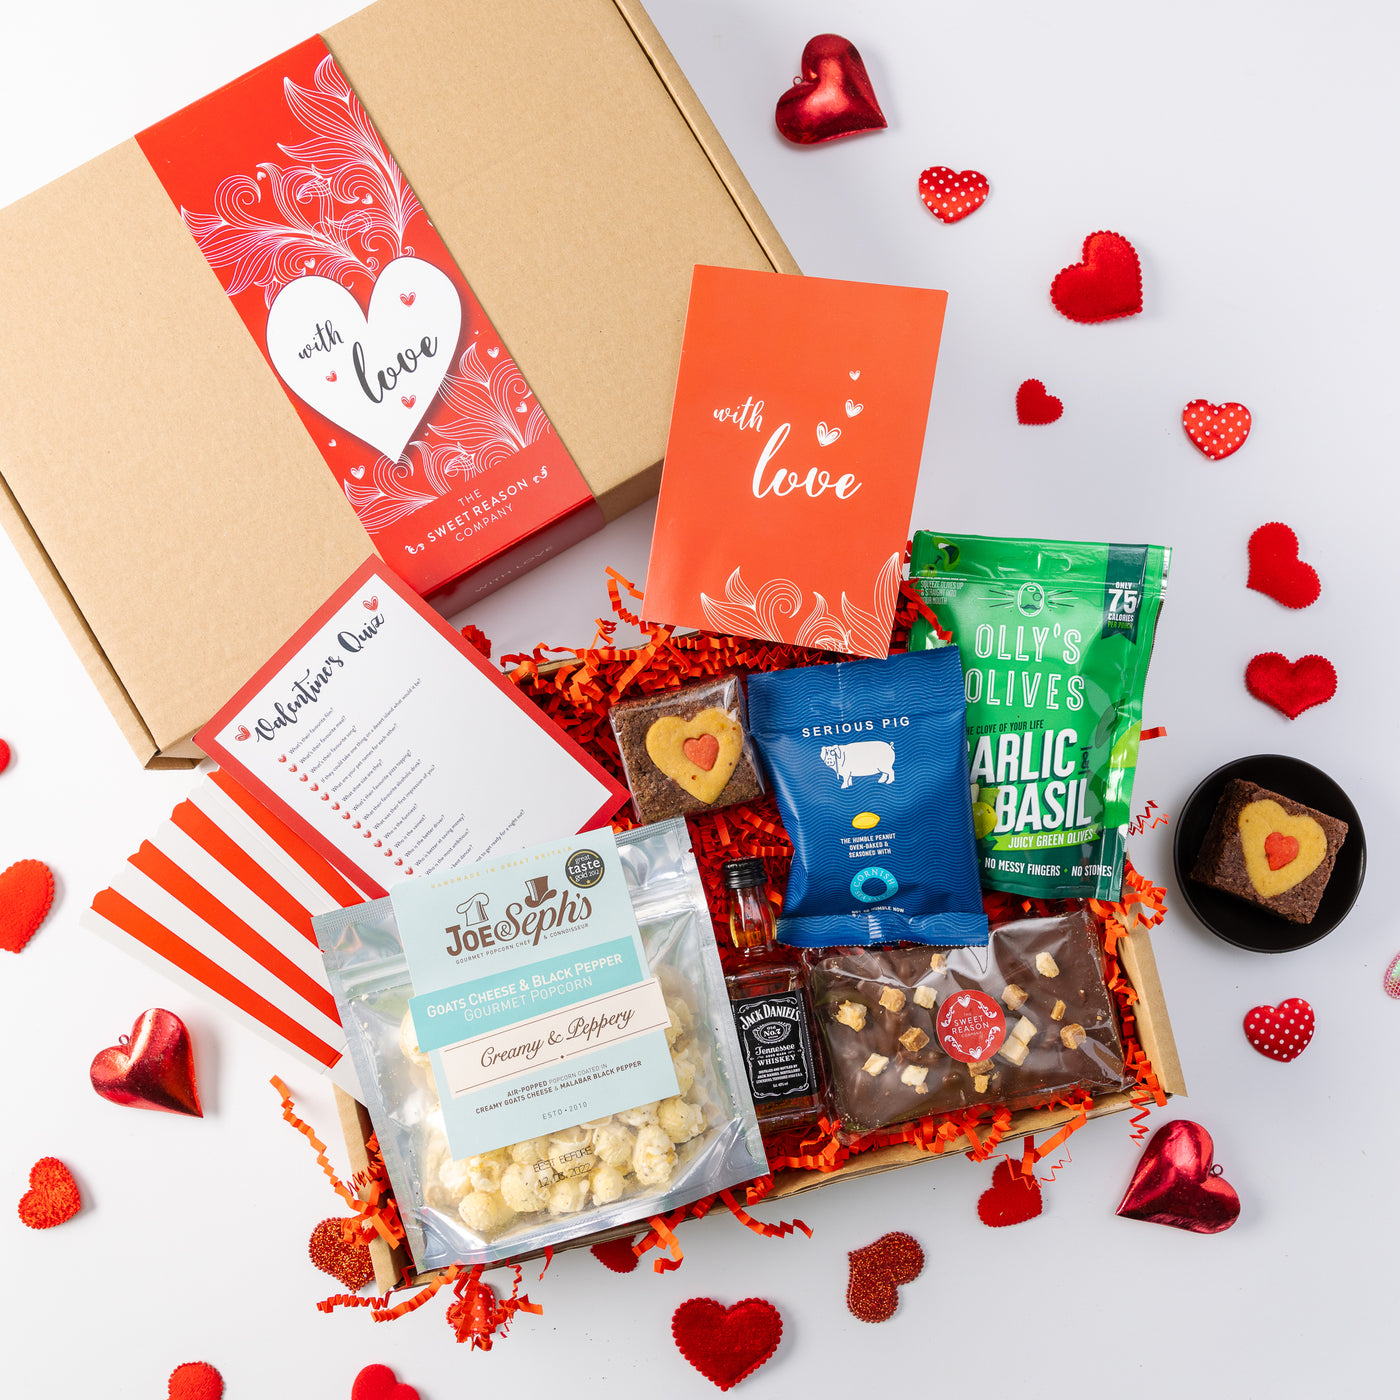 'With Love' Sweet and Savoury Treats